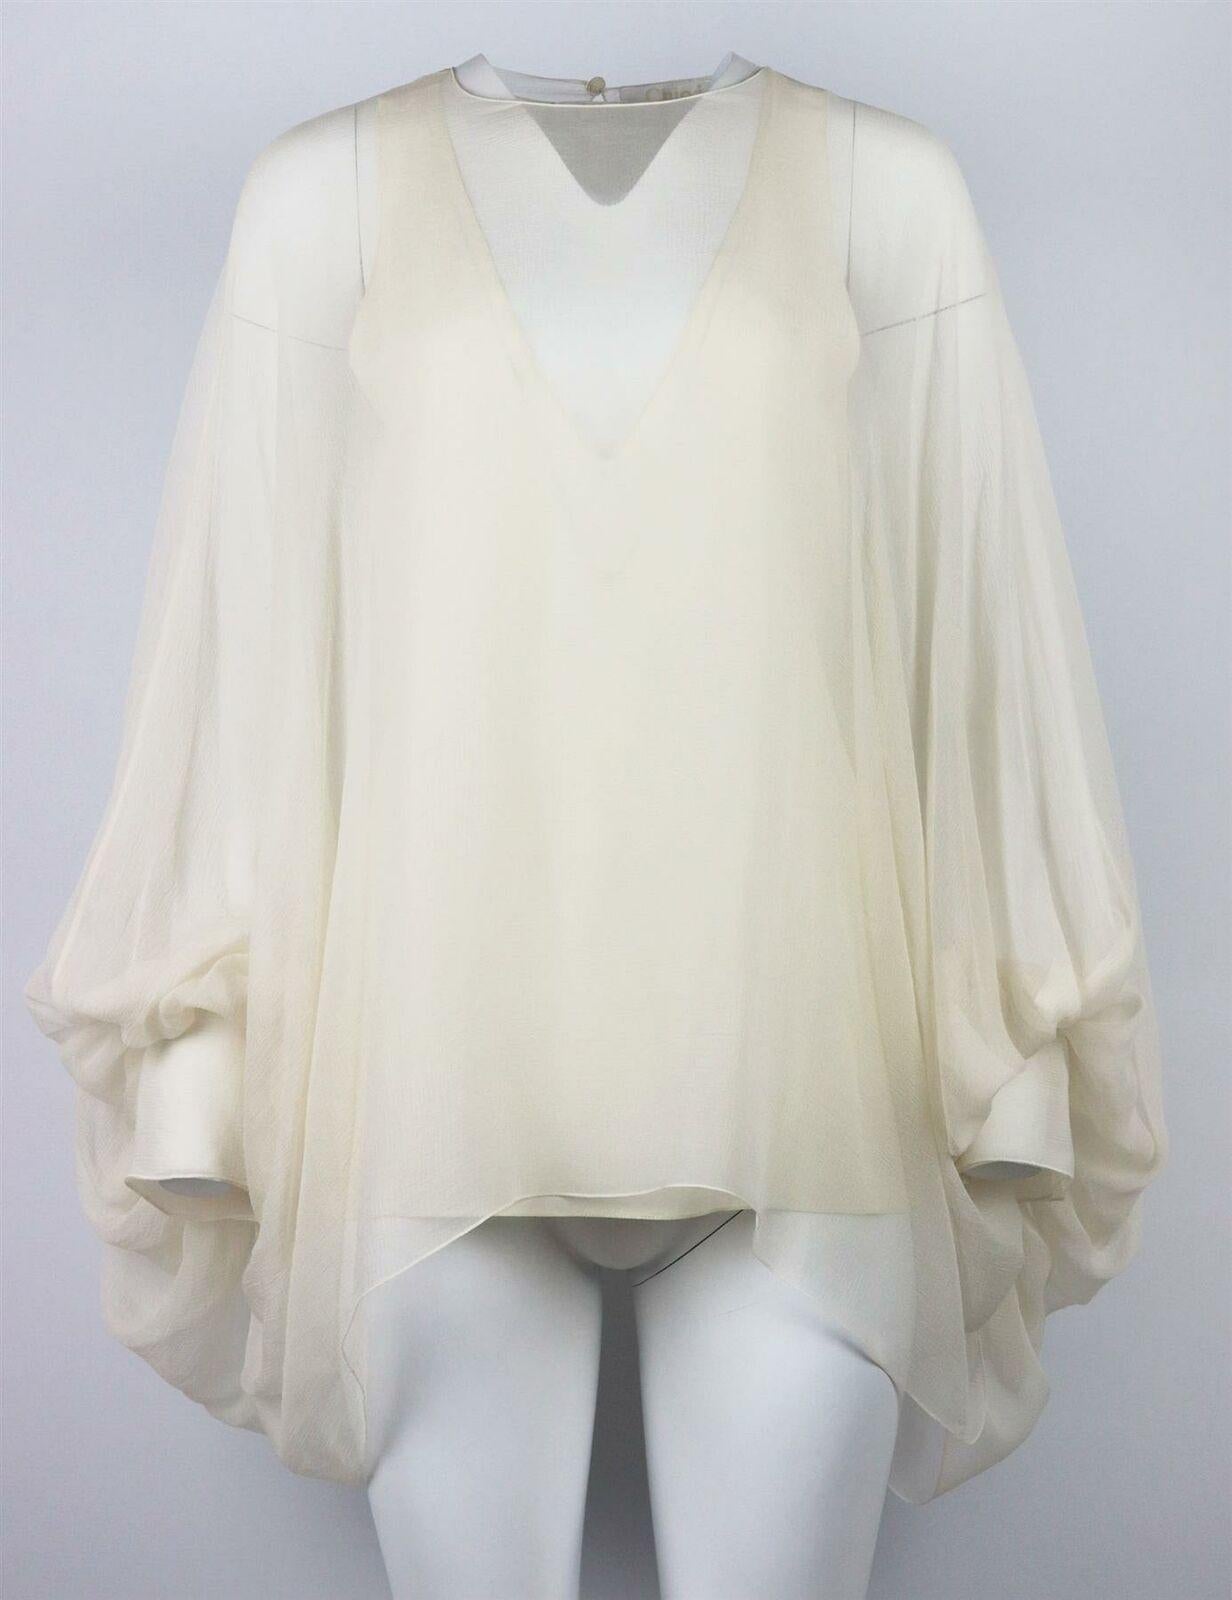 This lightweight blouse by Chloe is imbued with the label's ethereal romance, the diaphanous silhouette is crafted from ivory-hued silk-georgette, with long balloon sleeves that are delicately gathered by oversized cuffs and ribbon tie. Ivory